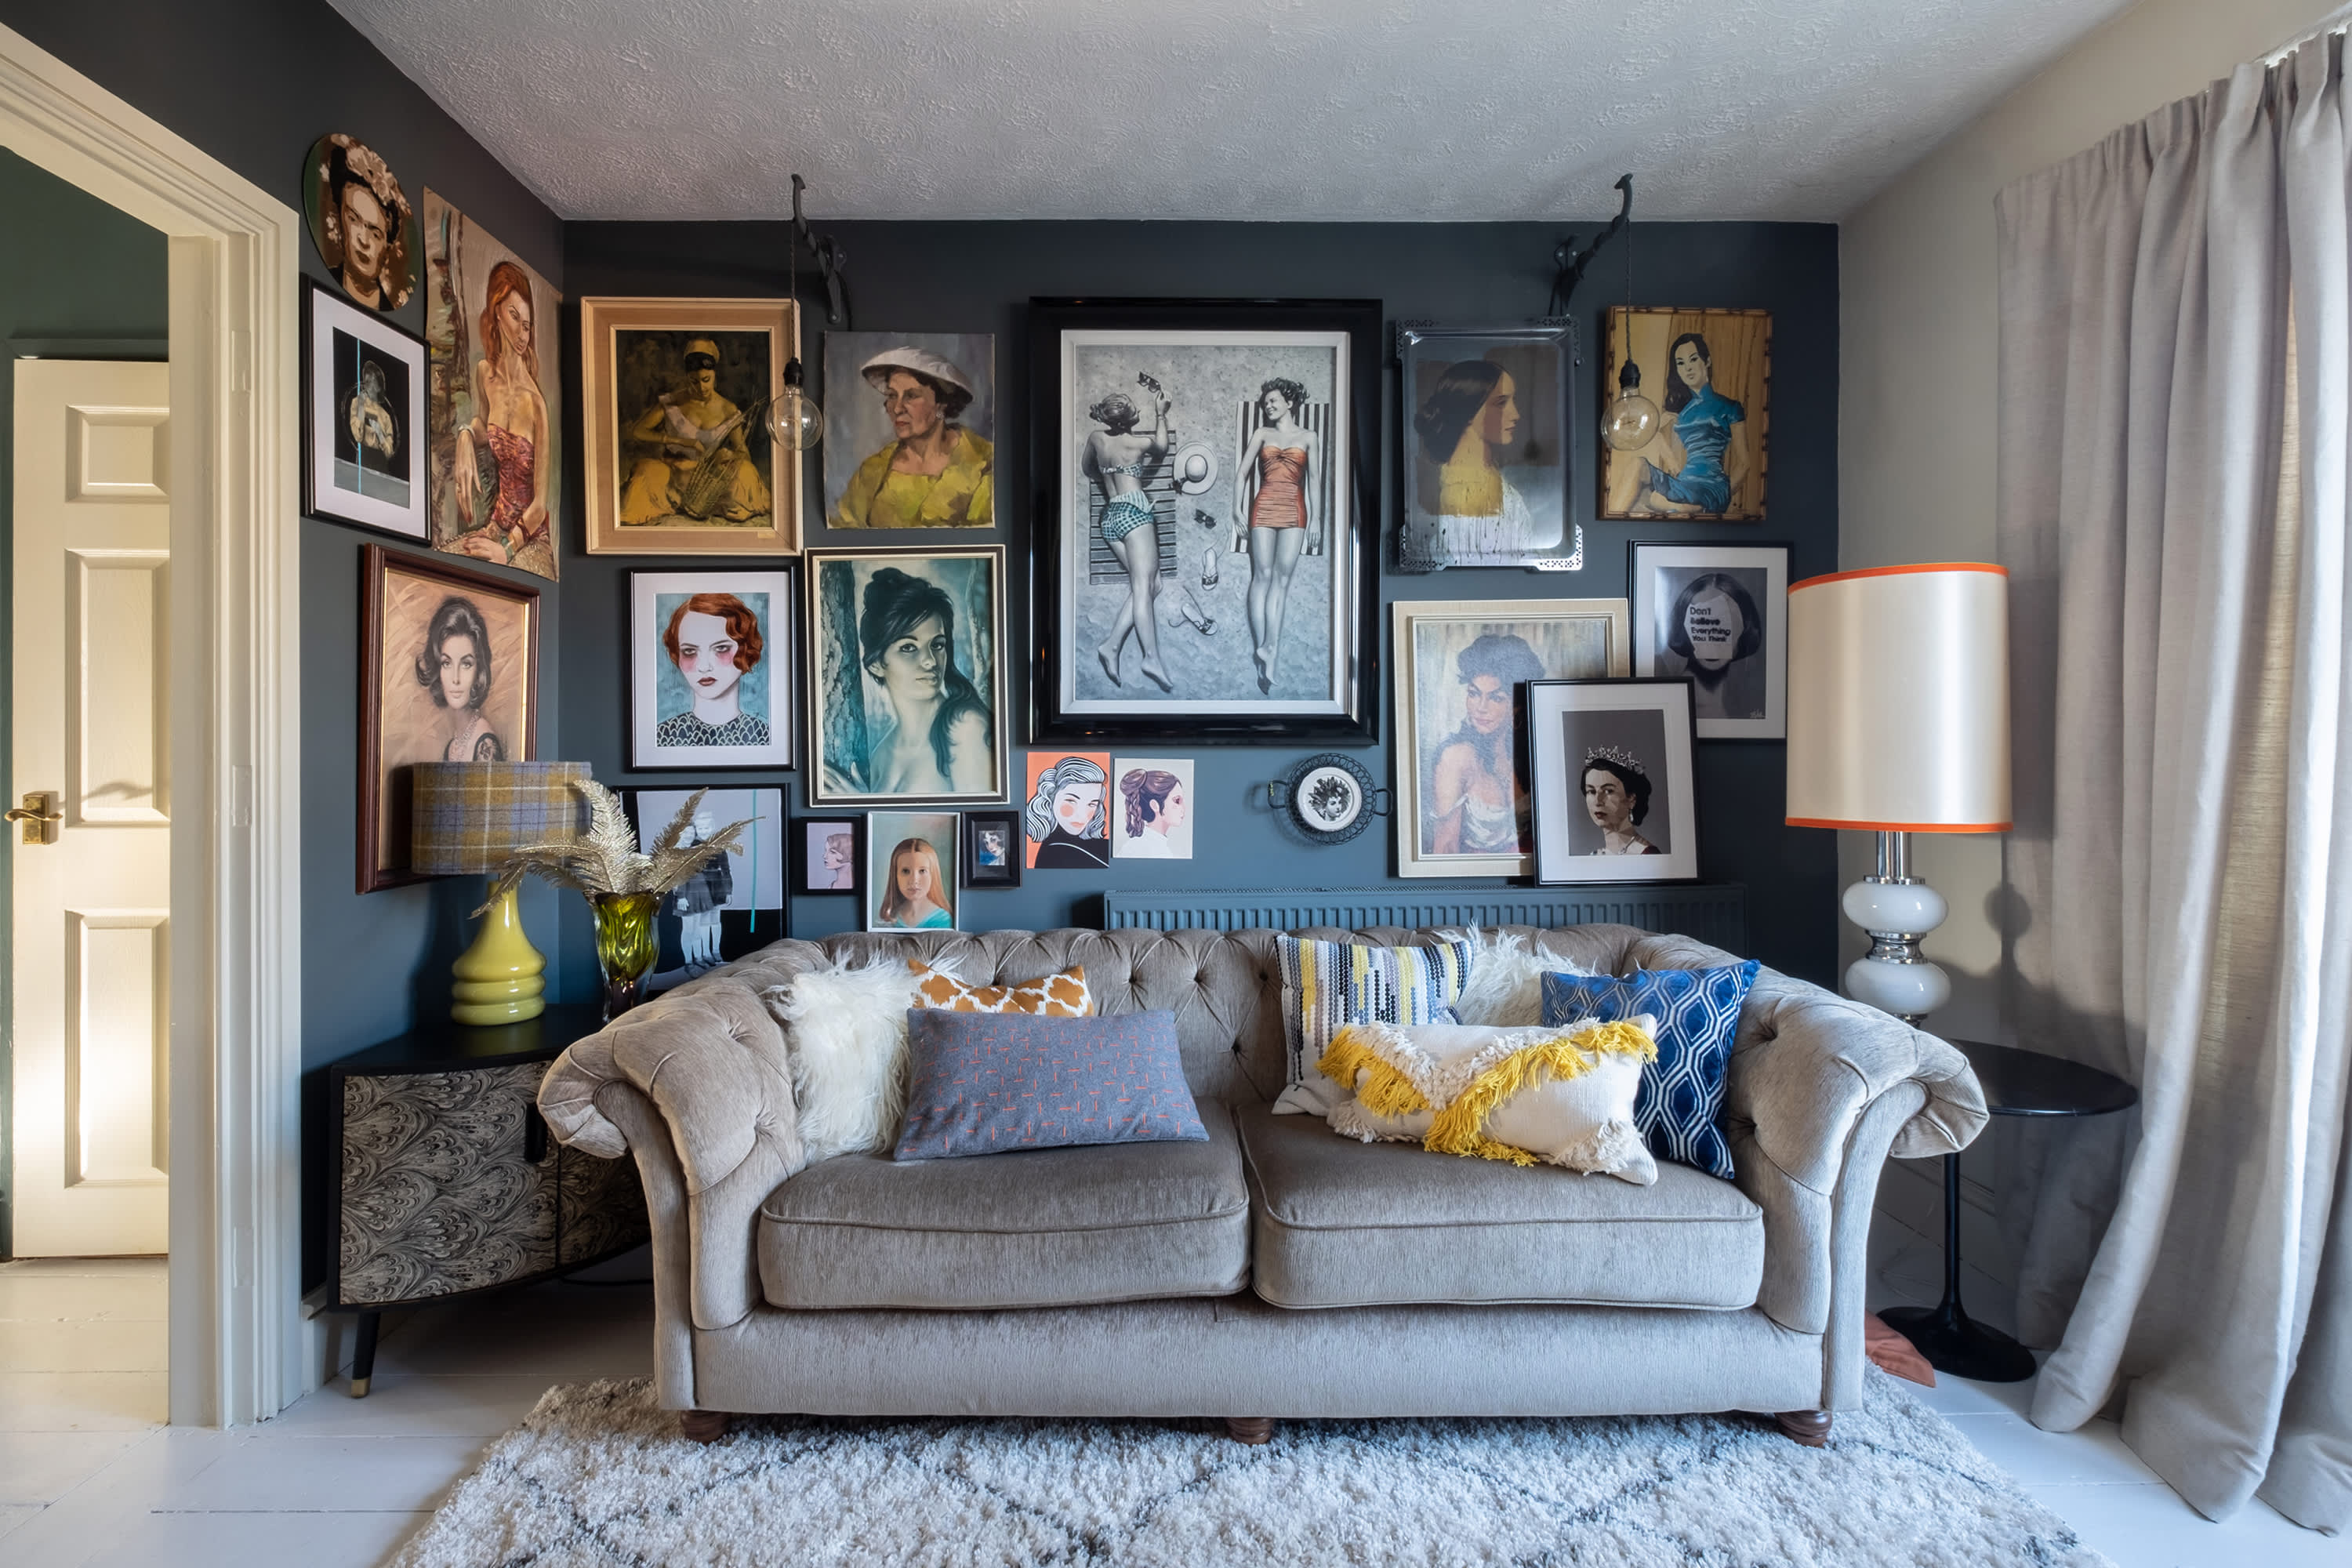 Gallery Wall Layout: How to Make a Living Room Gallery Wall - VIV